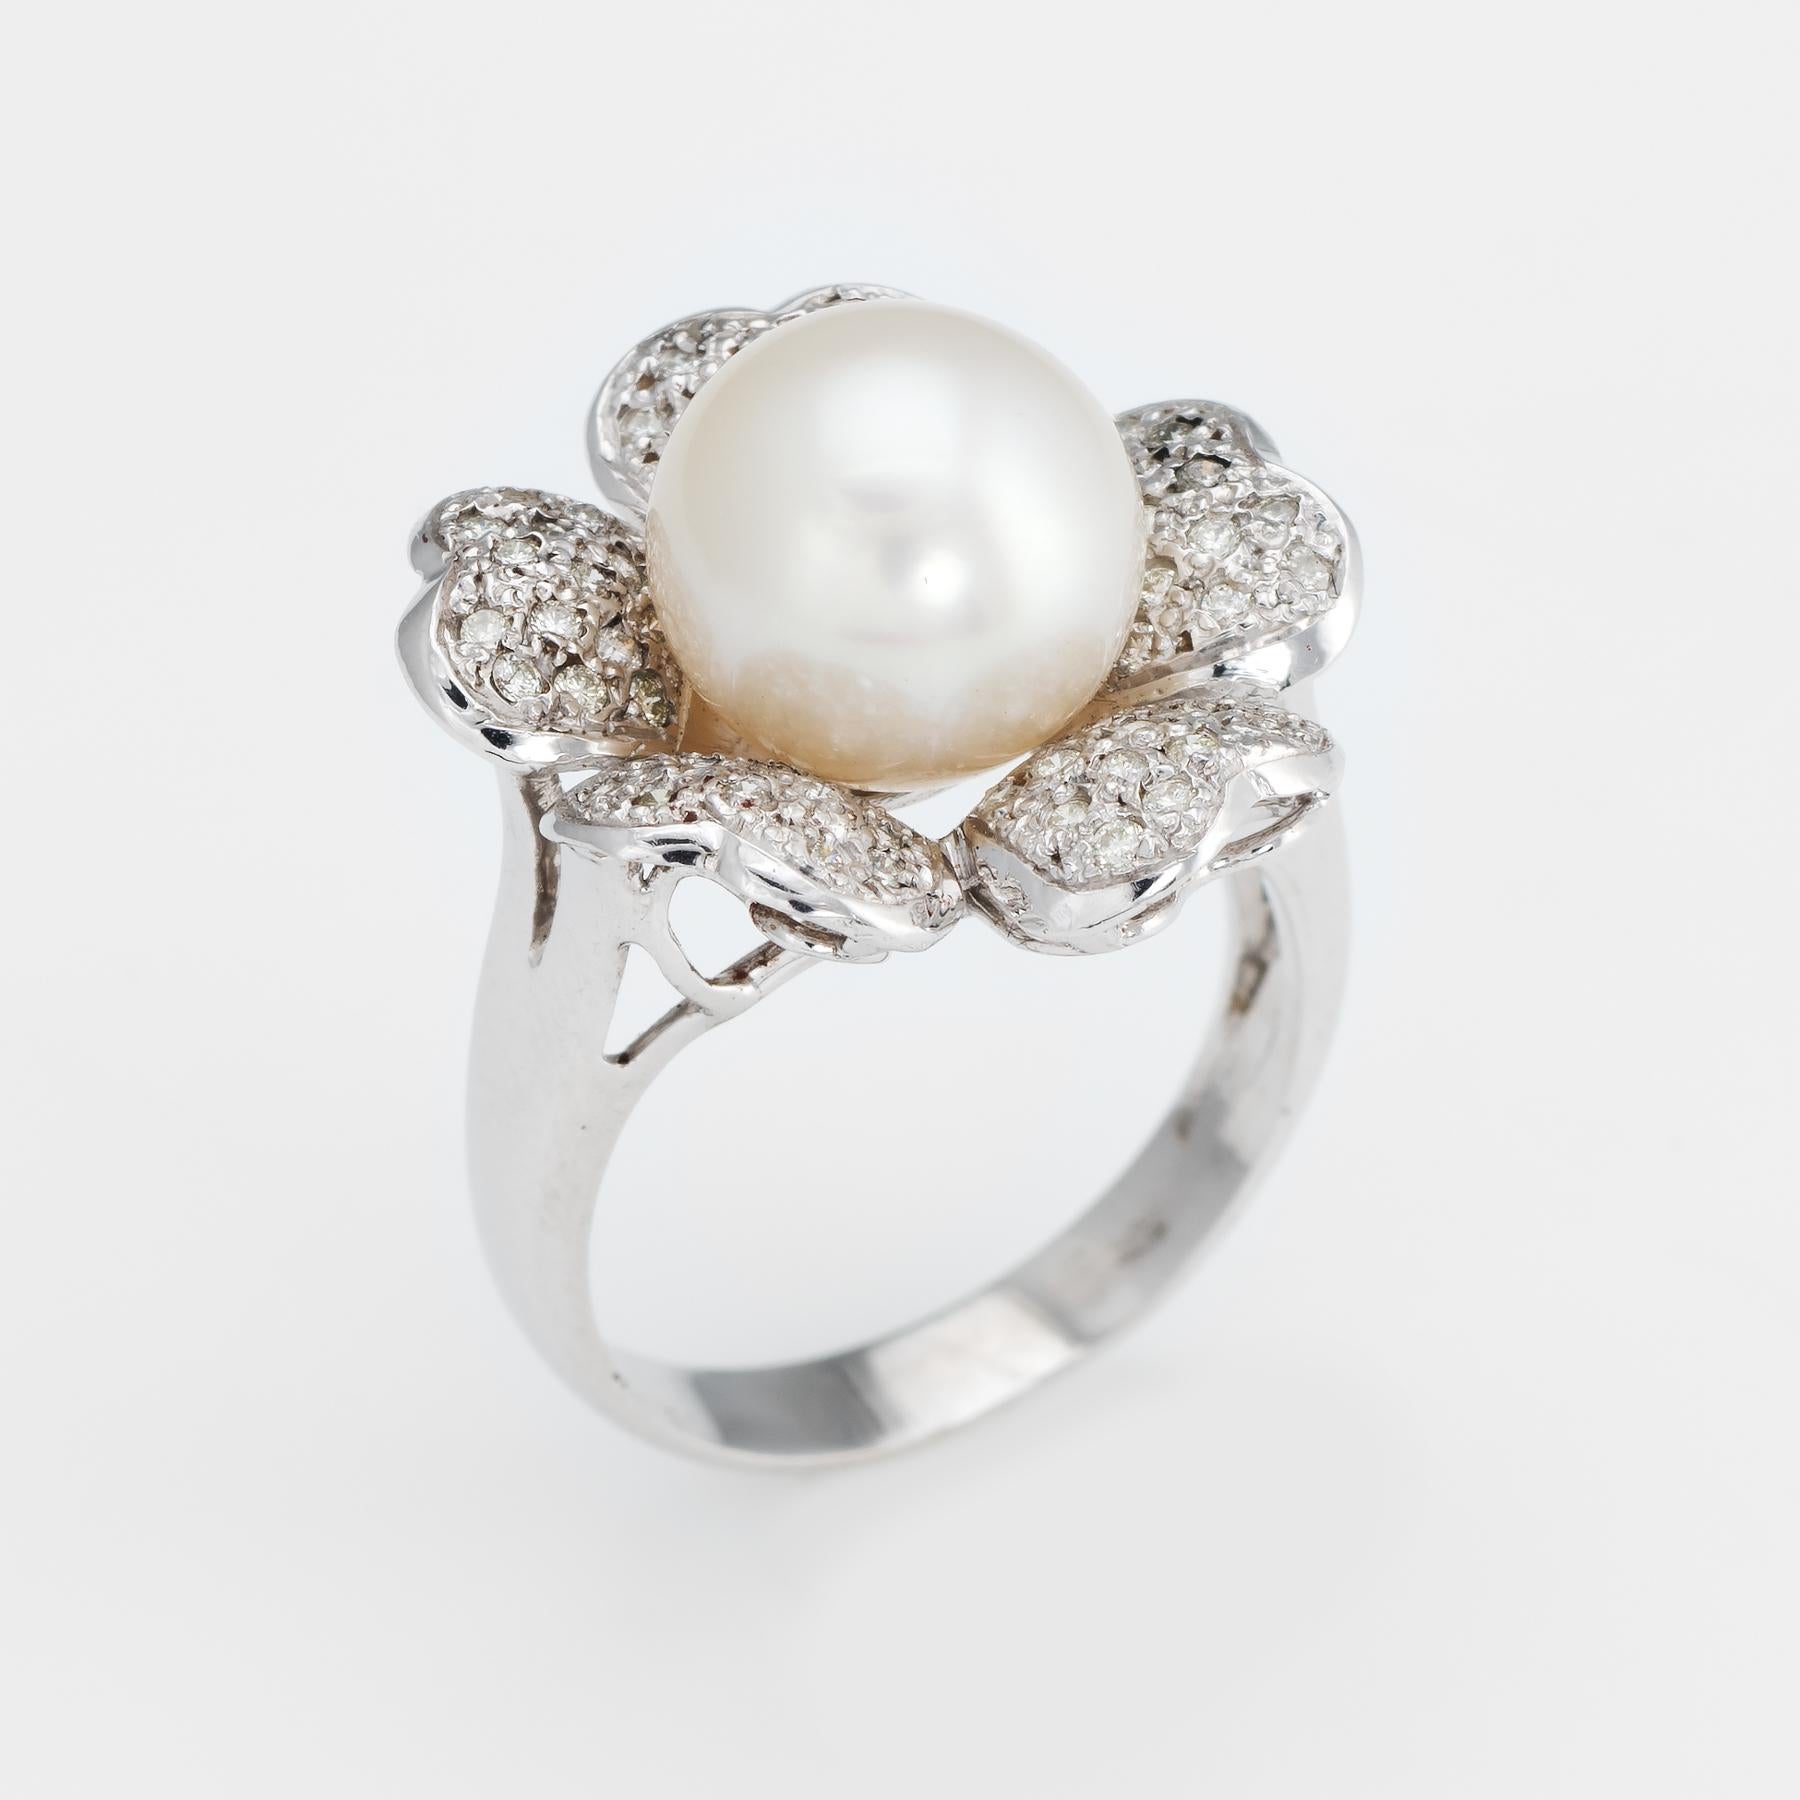 Finely detailed vintage South Sea cultured pearl and diamond cocktail ring, crafted in 14 karat white gold. 

Cultured white South Sea pearl measures 10.5mm, accented with an estimated 0.40 carats of diamonds (estimated at H-I color and SI1-2